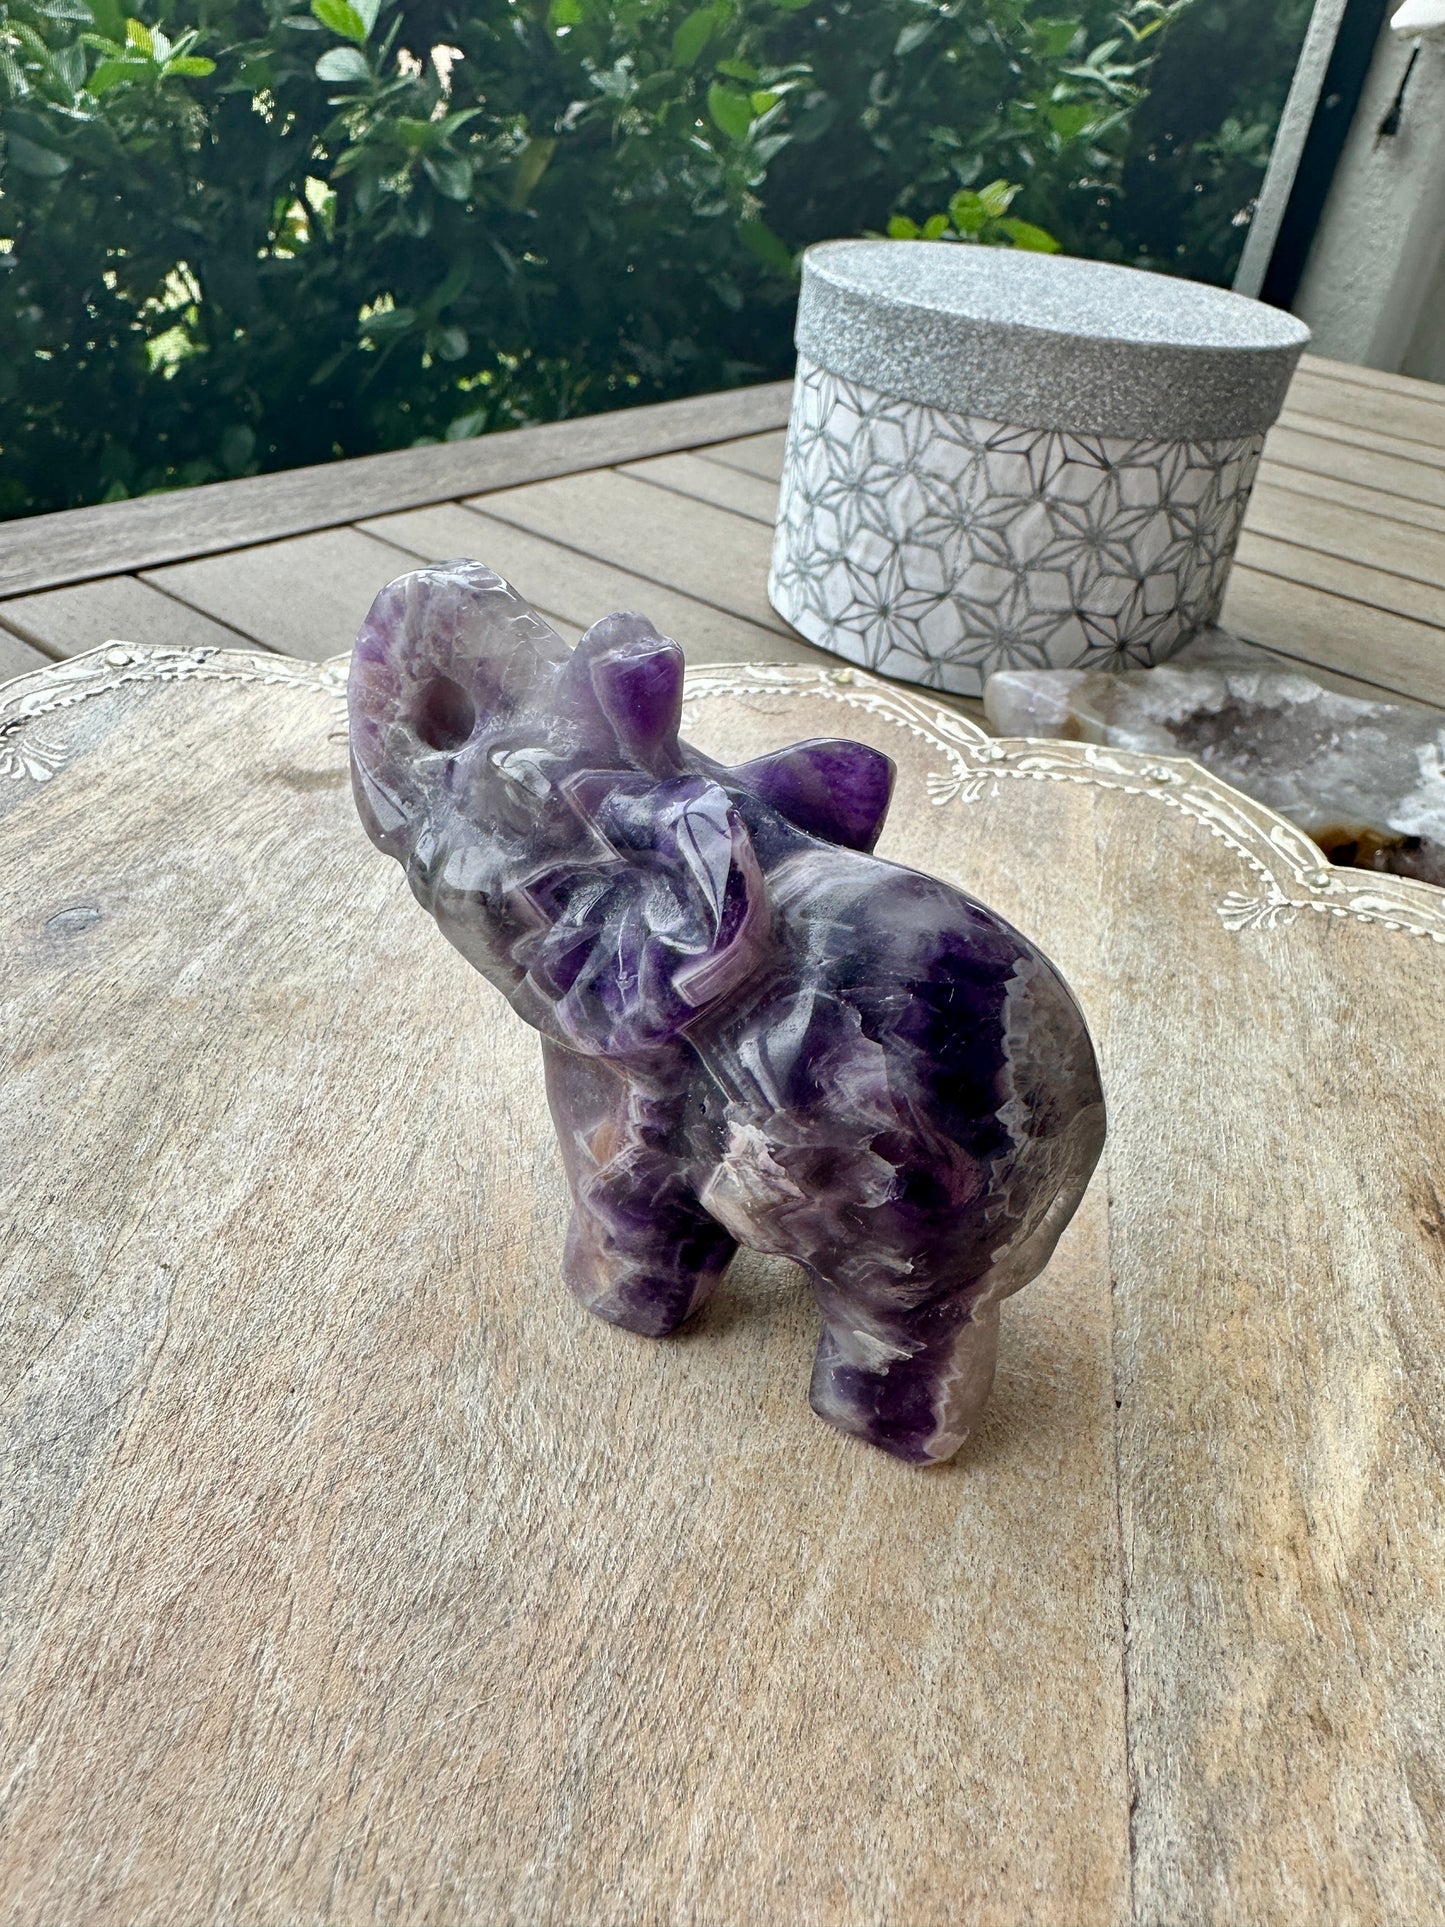 Dream Amethyst Elephant Sculpture - Symbol of Peace, Wisdom, and Spiritual Growth, Perfect for Enhancing Tranquility